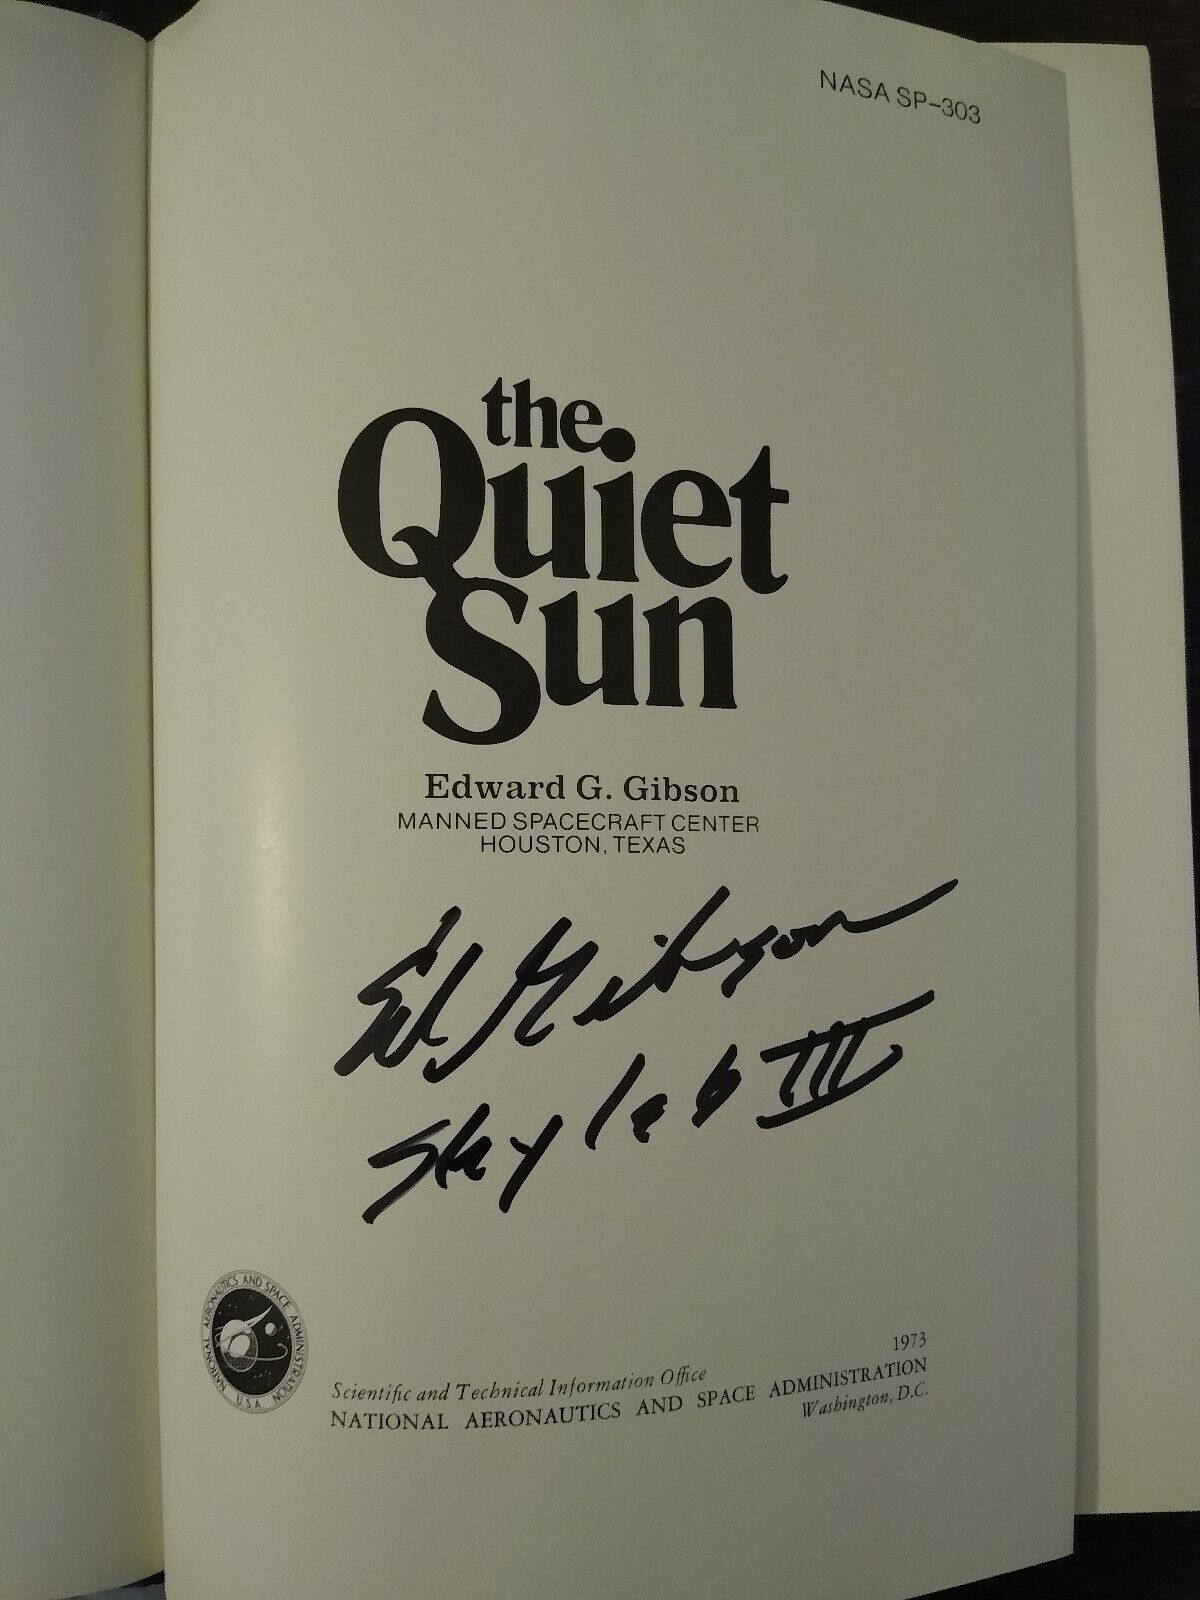 The Quiet Sun book signed By NASA Astronaut Ed Gibson The Father of Heliophysics